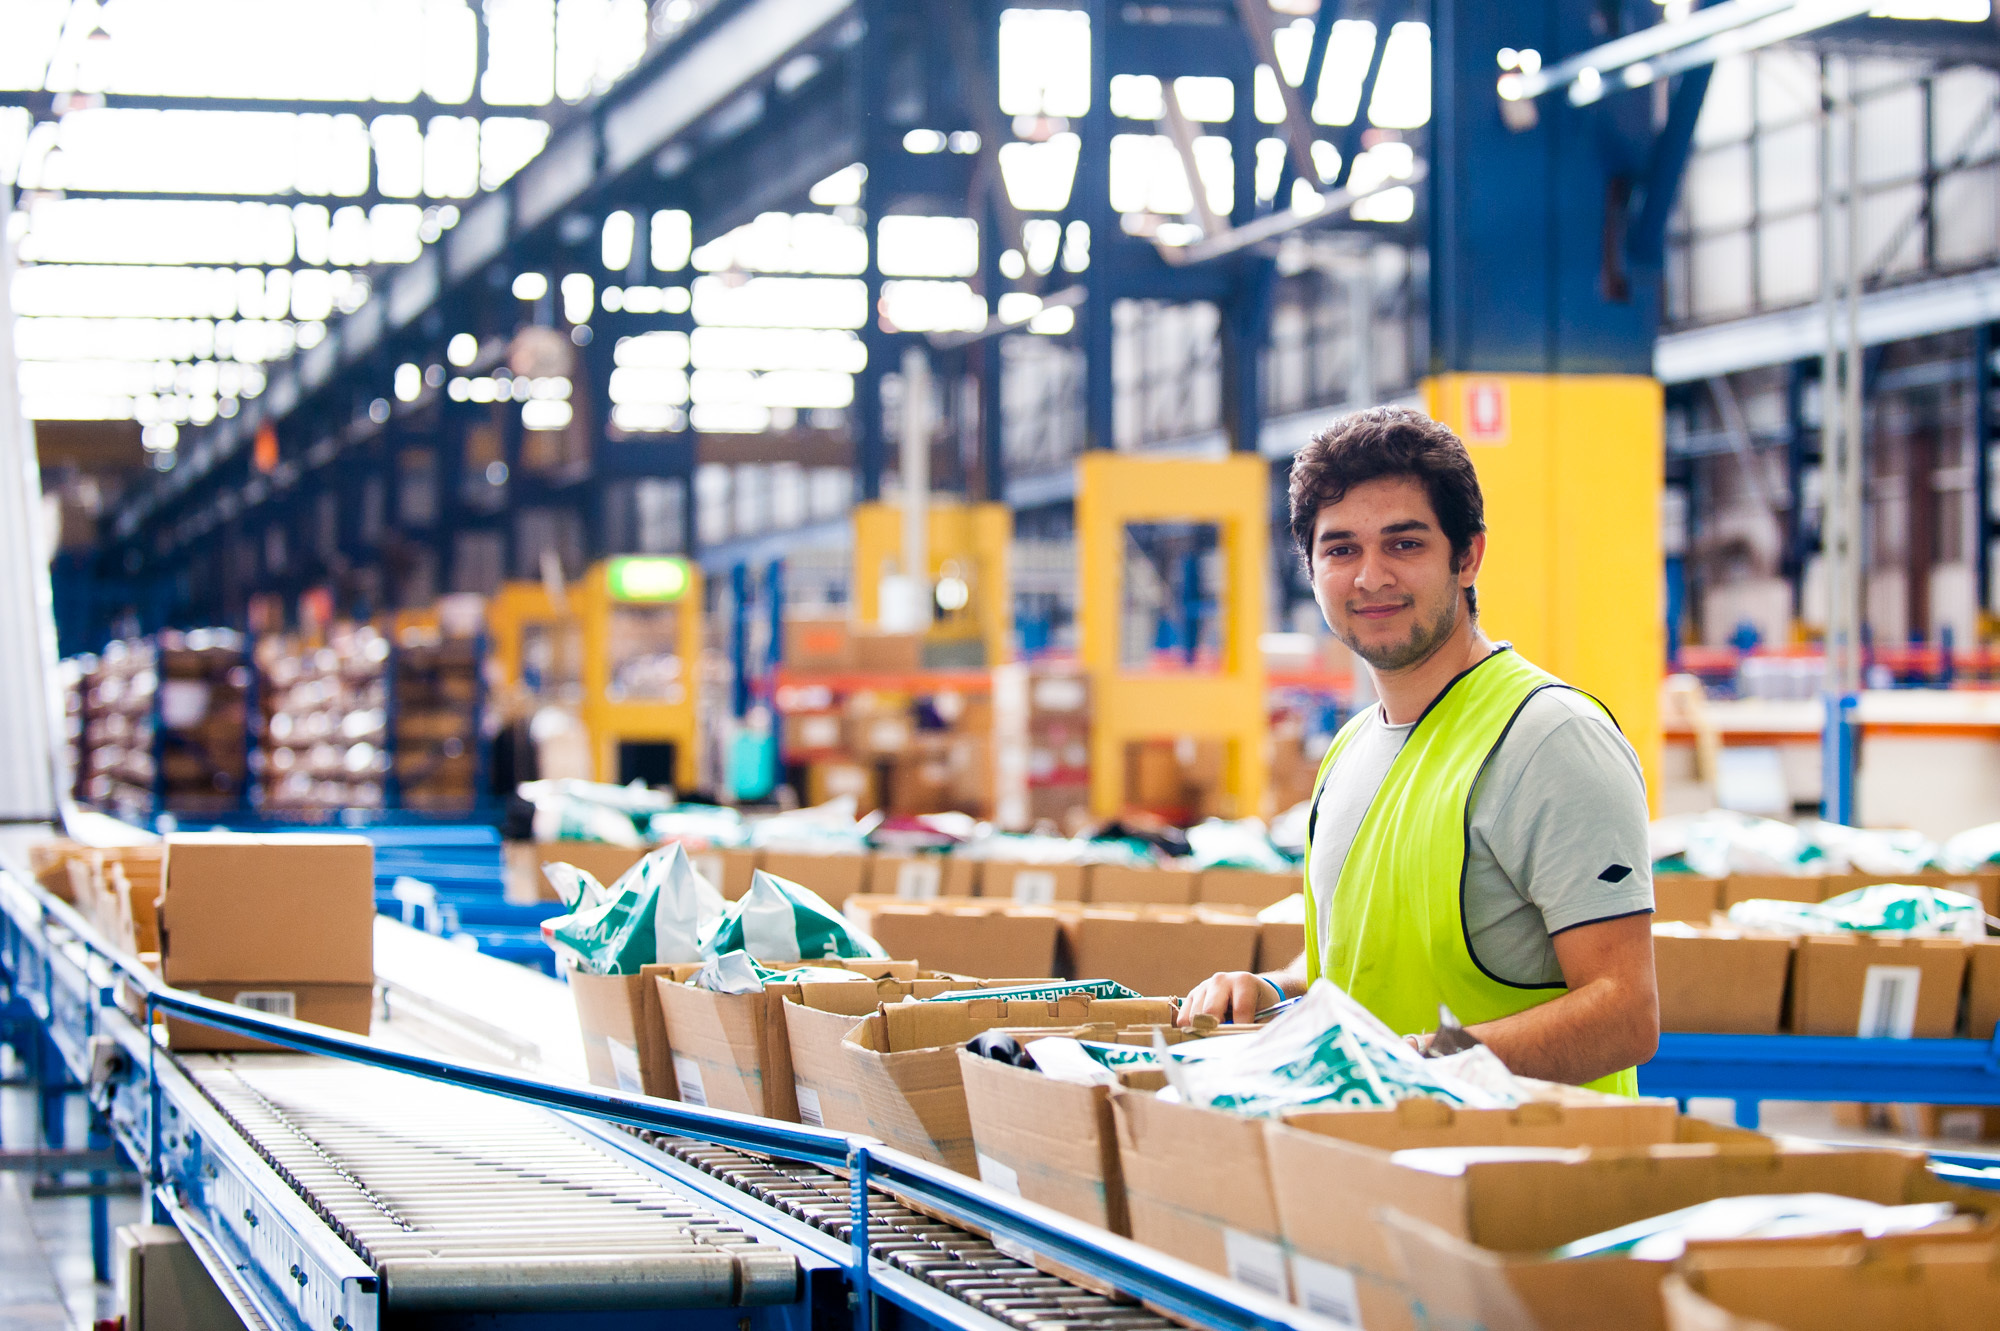 6 Areas of Fashion Warehousing and Distribution